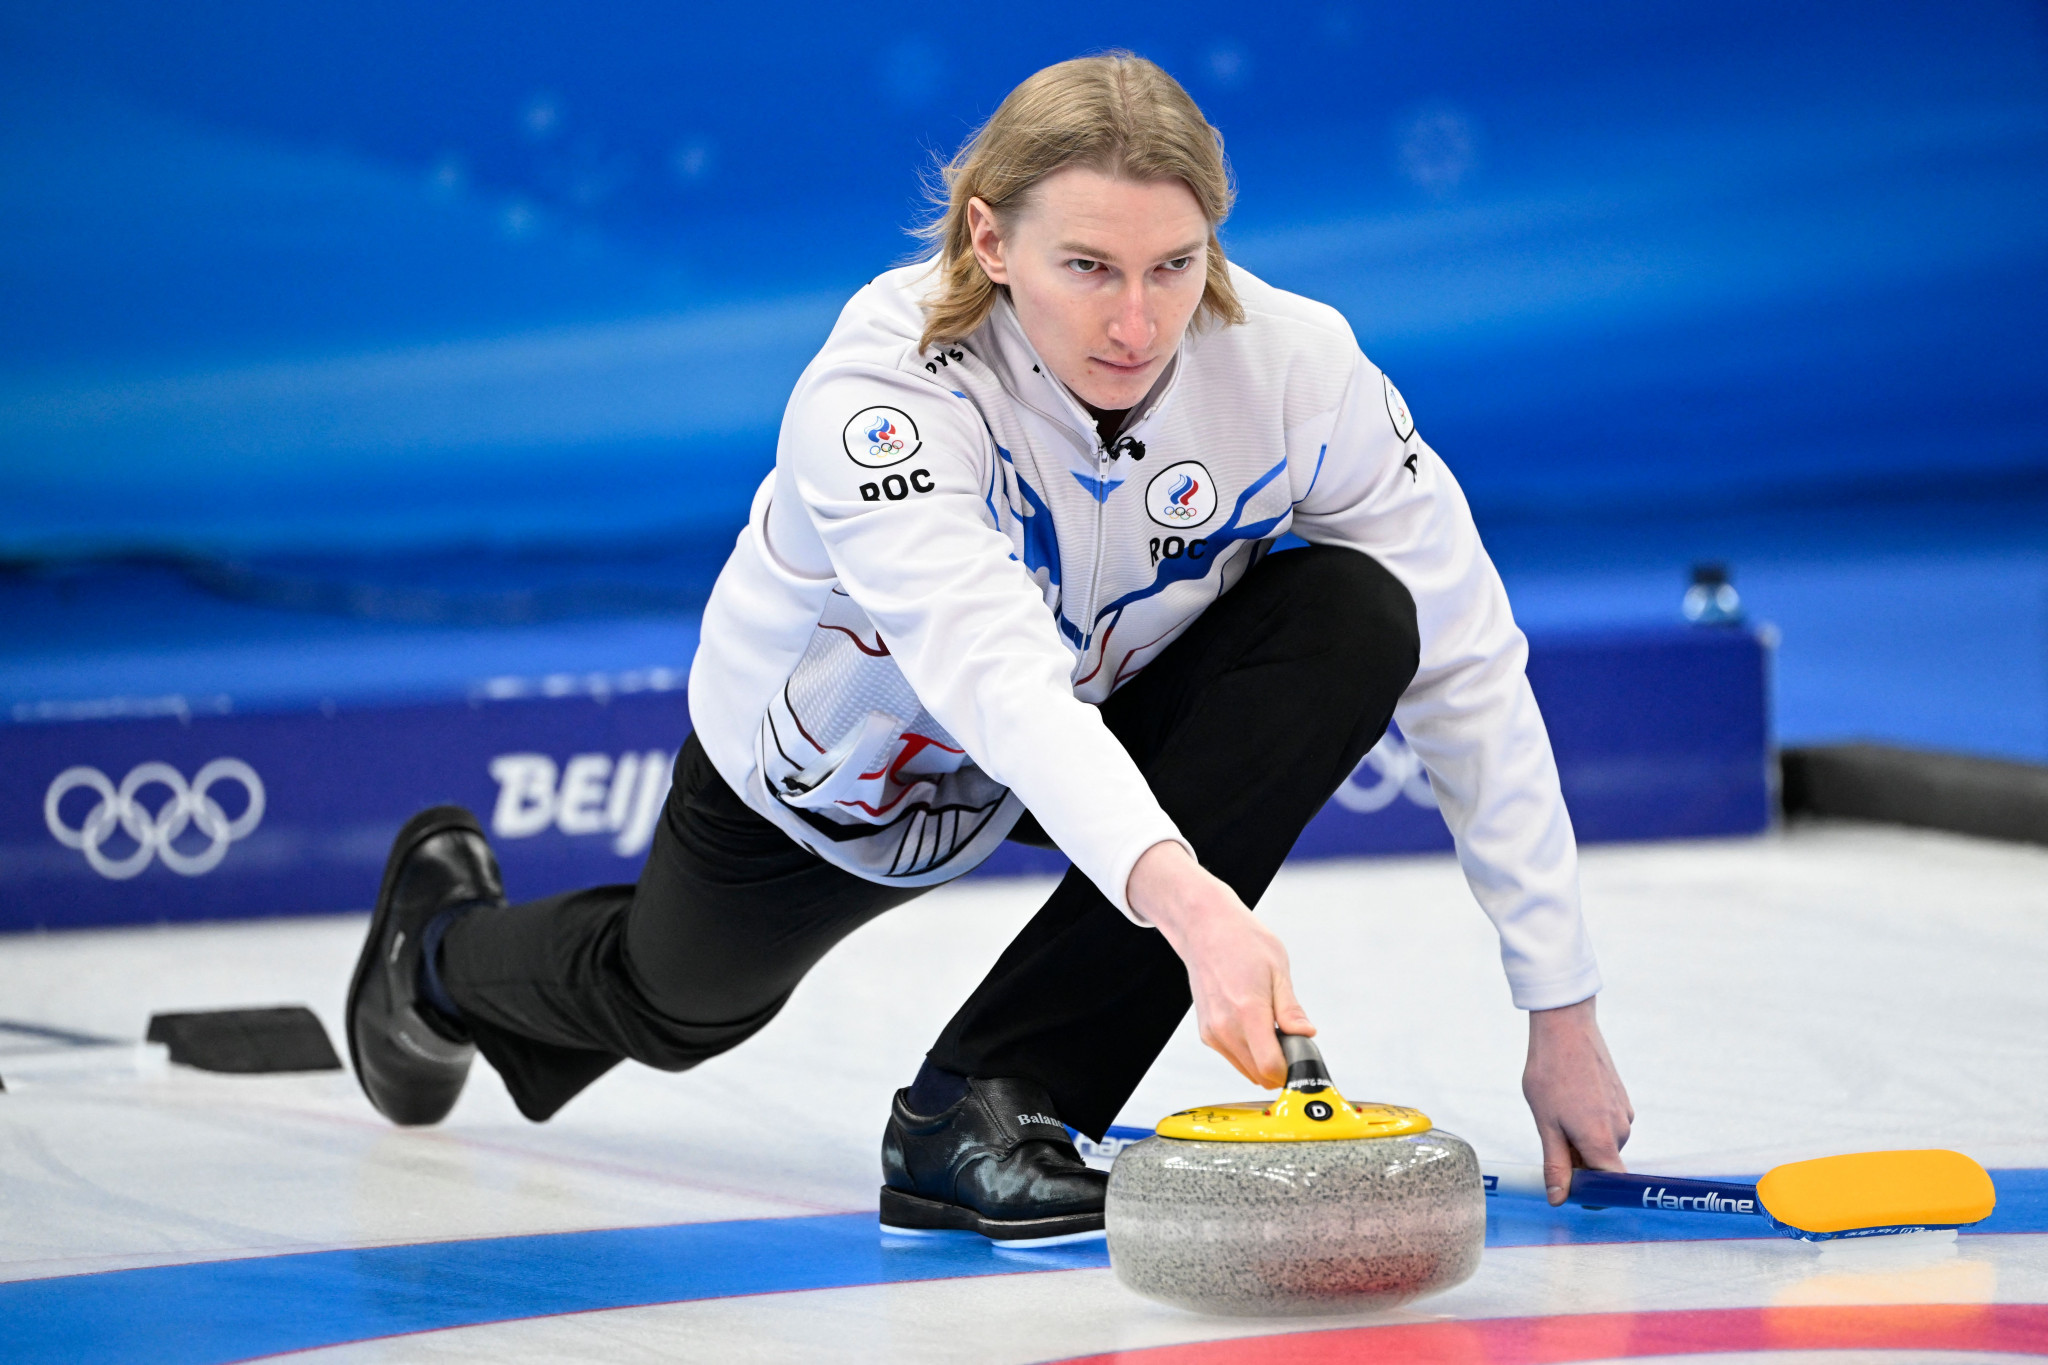 RCF officially excluded from rest of 2021-2022 international curling season